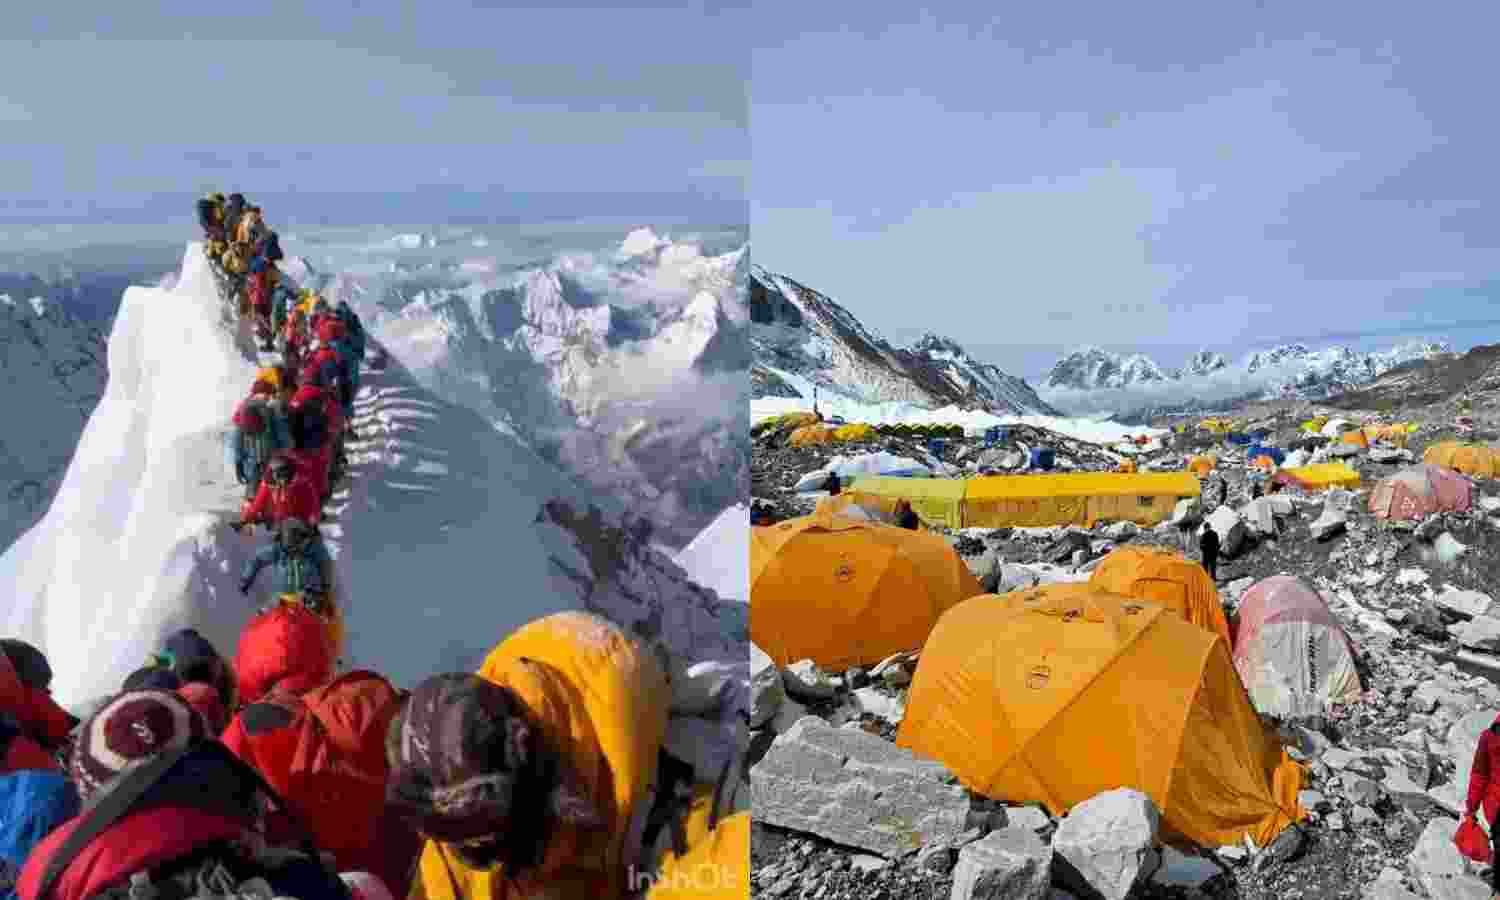 Everest Base Camp filth and summit traffic endanger climbers